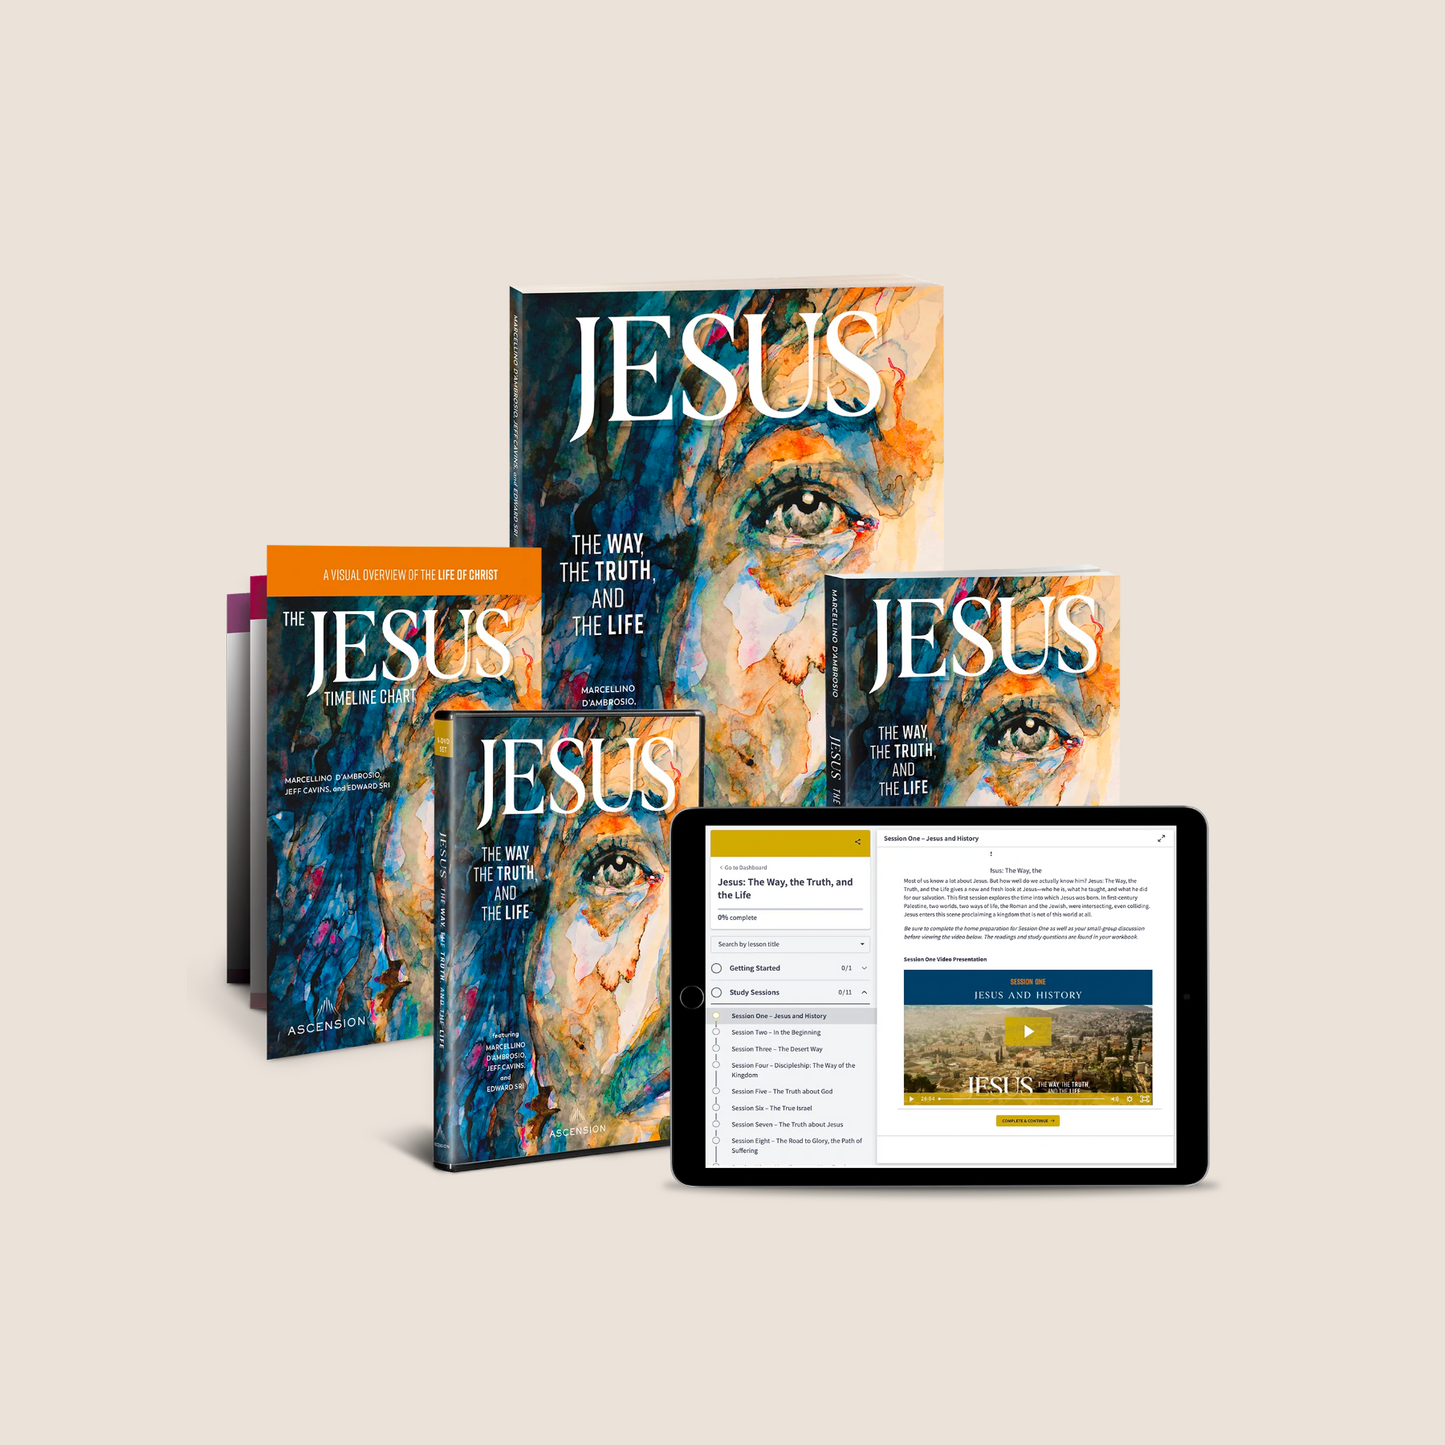 [PRE-ORDER] Jesus: The Way, the Truth, and the Life Starter Pack